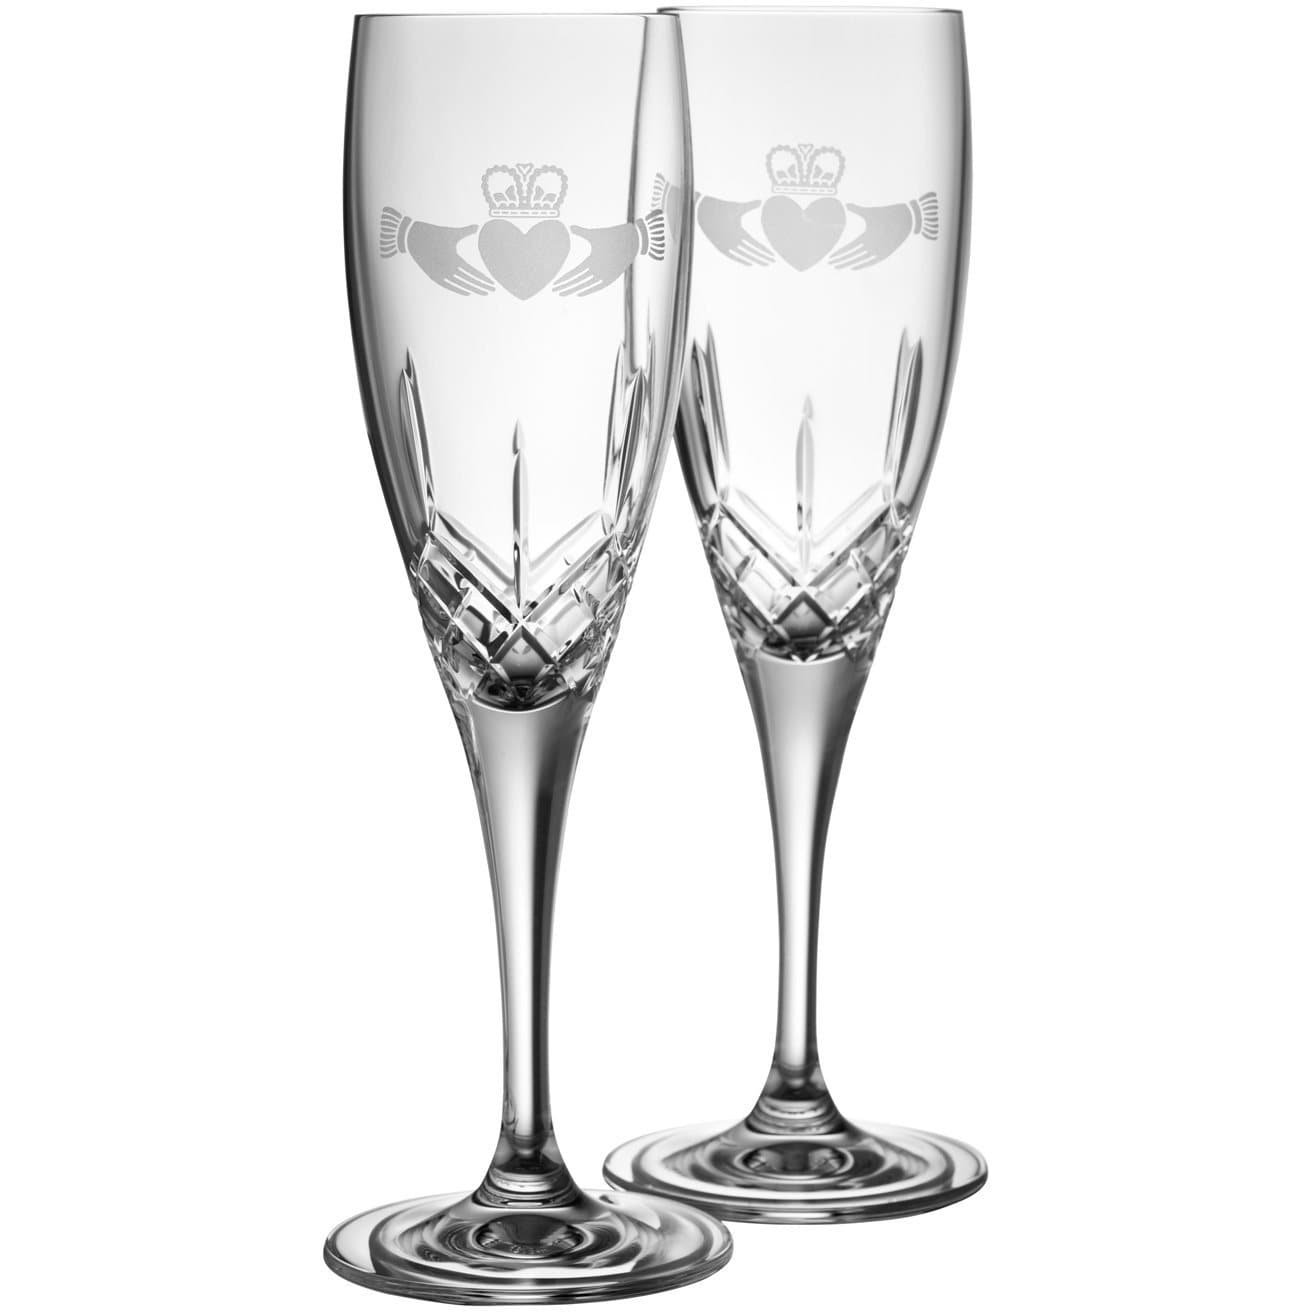 Galway Crystal Bride and Groom Flute (floral spray) - Frank Roche & Sons Ltd